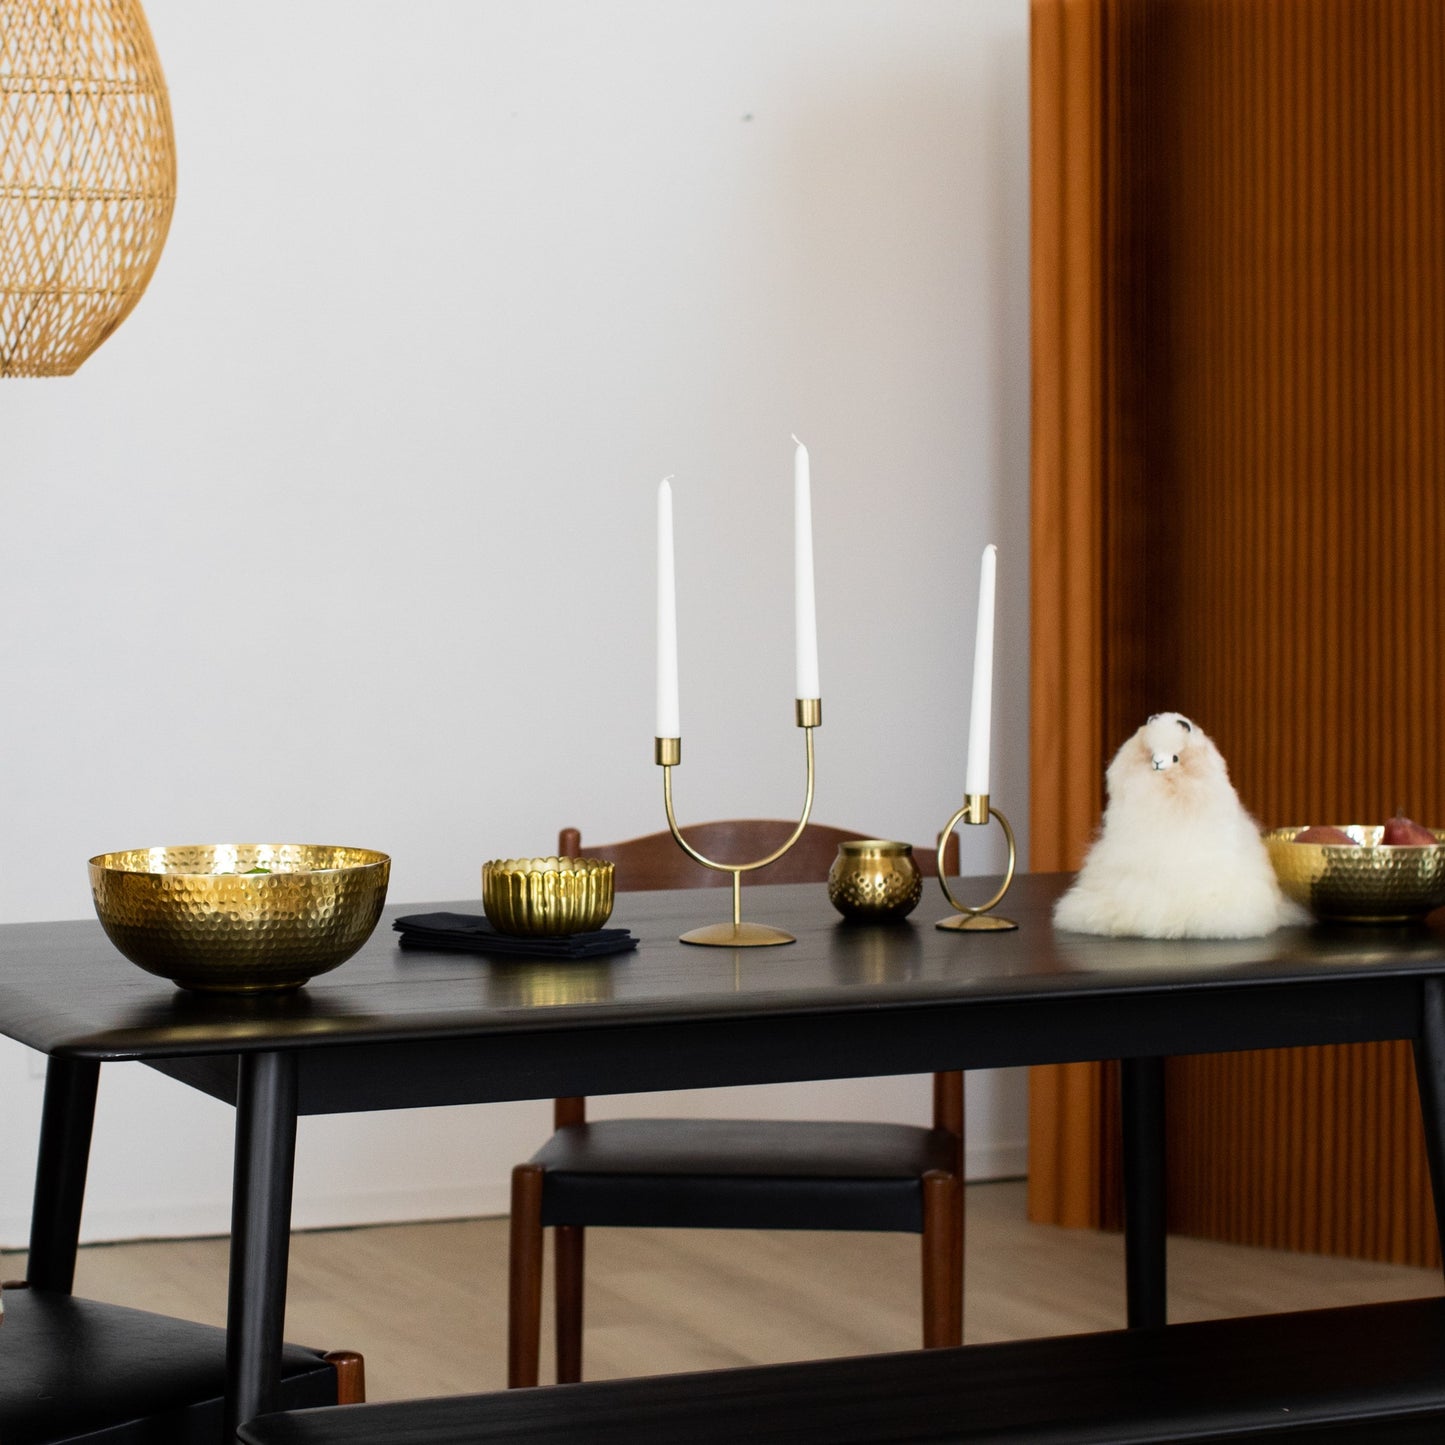 Asymmetrical Candle Holder - Gold